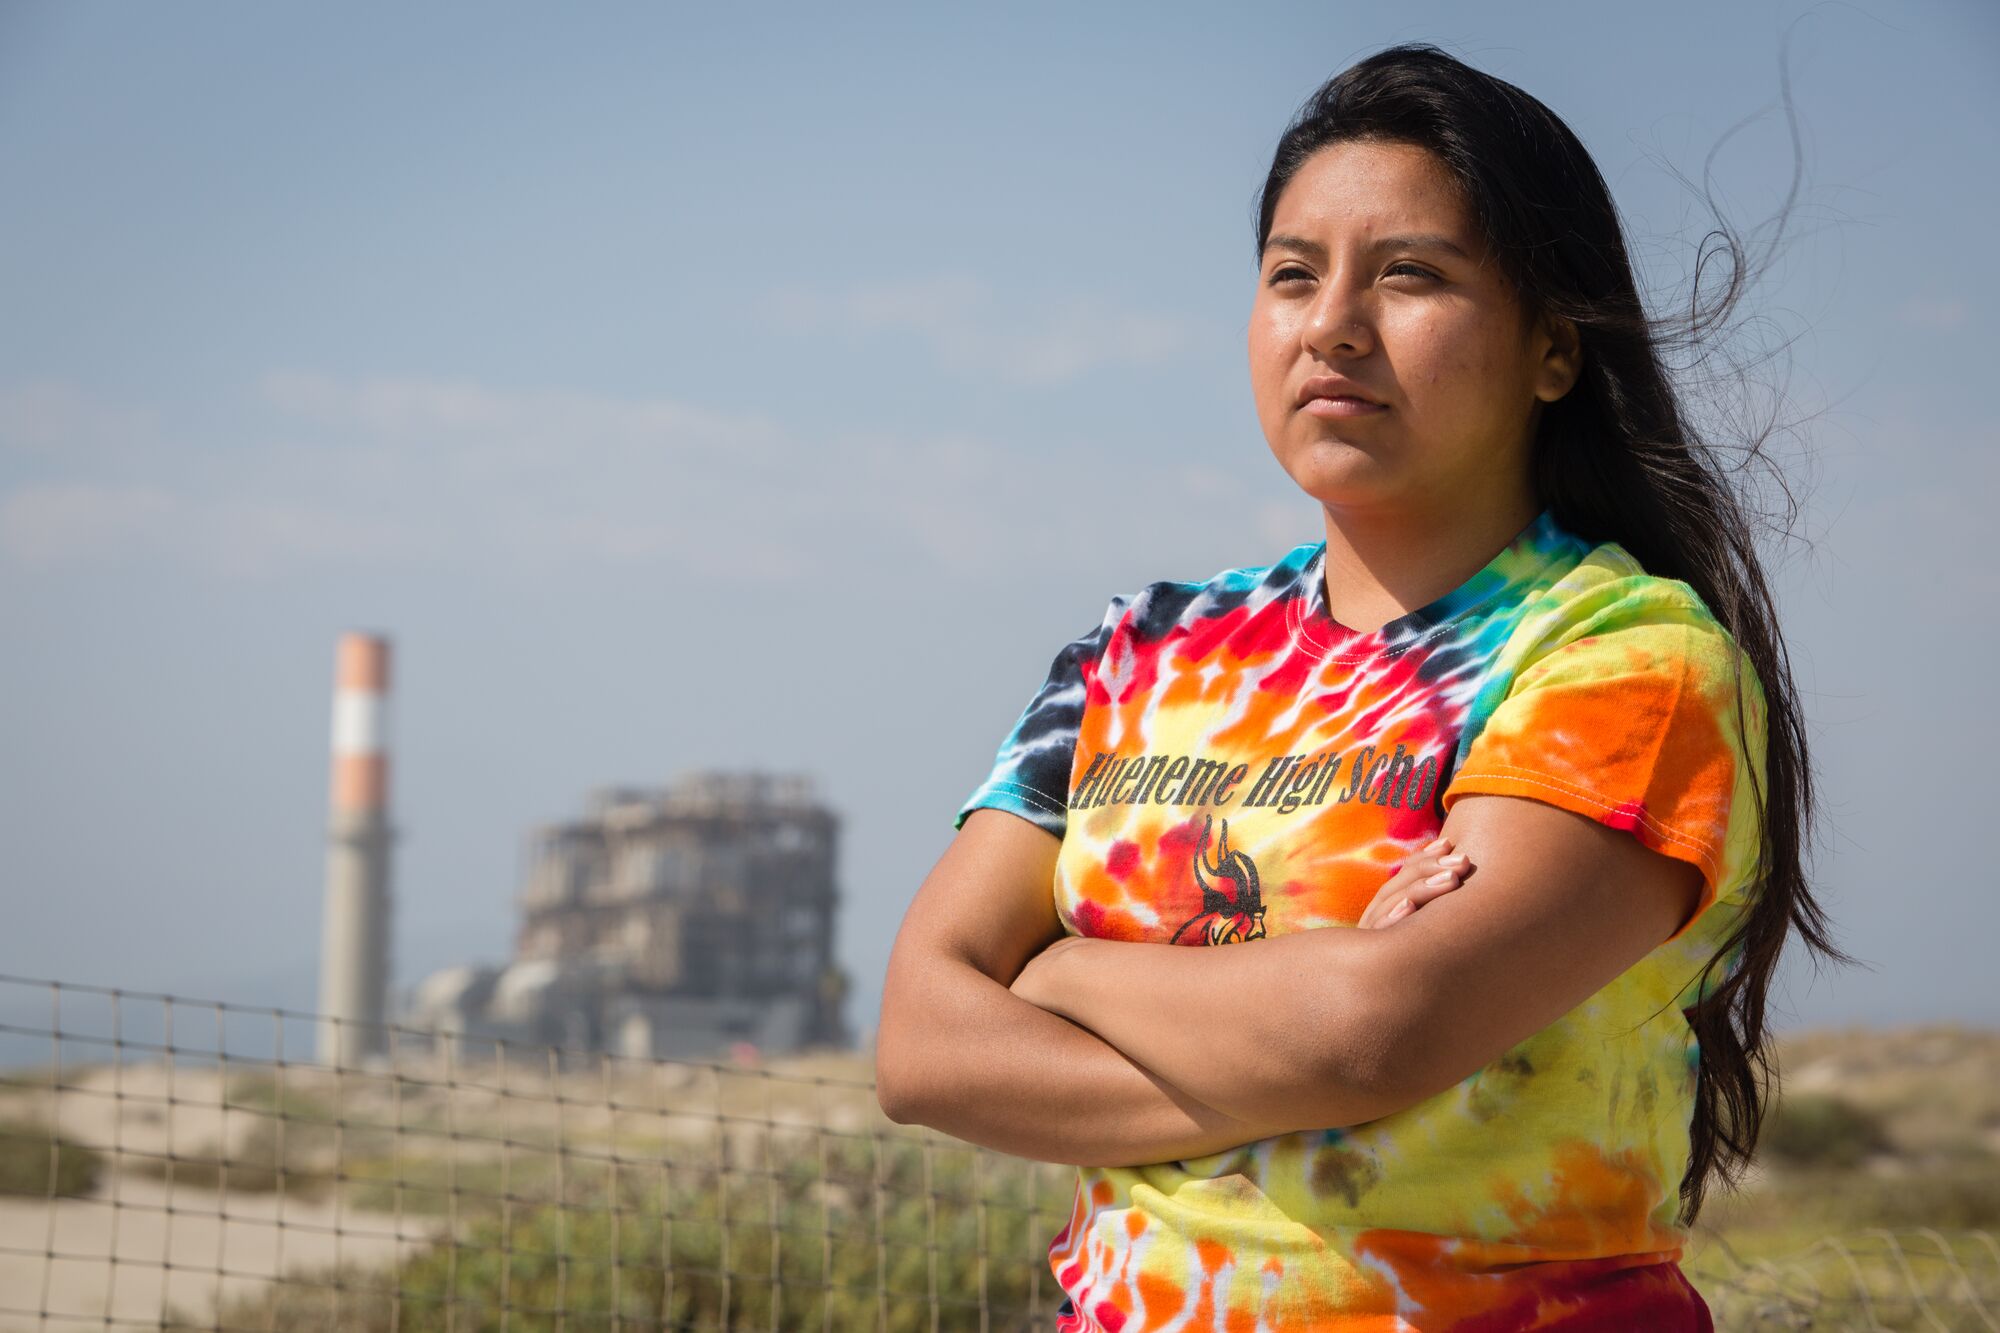 Lilian Bello in front of the Mandalay Generating Station in Oxnard, CA. The location was set to be the site of the Puente Power Station, a proposed gas power plant.